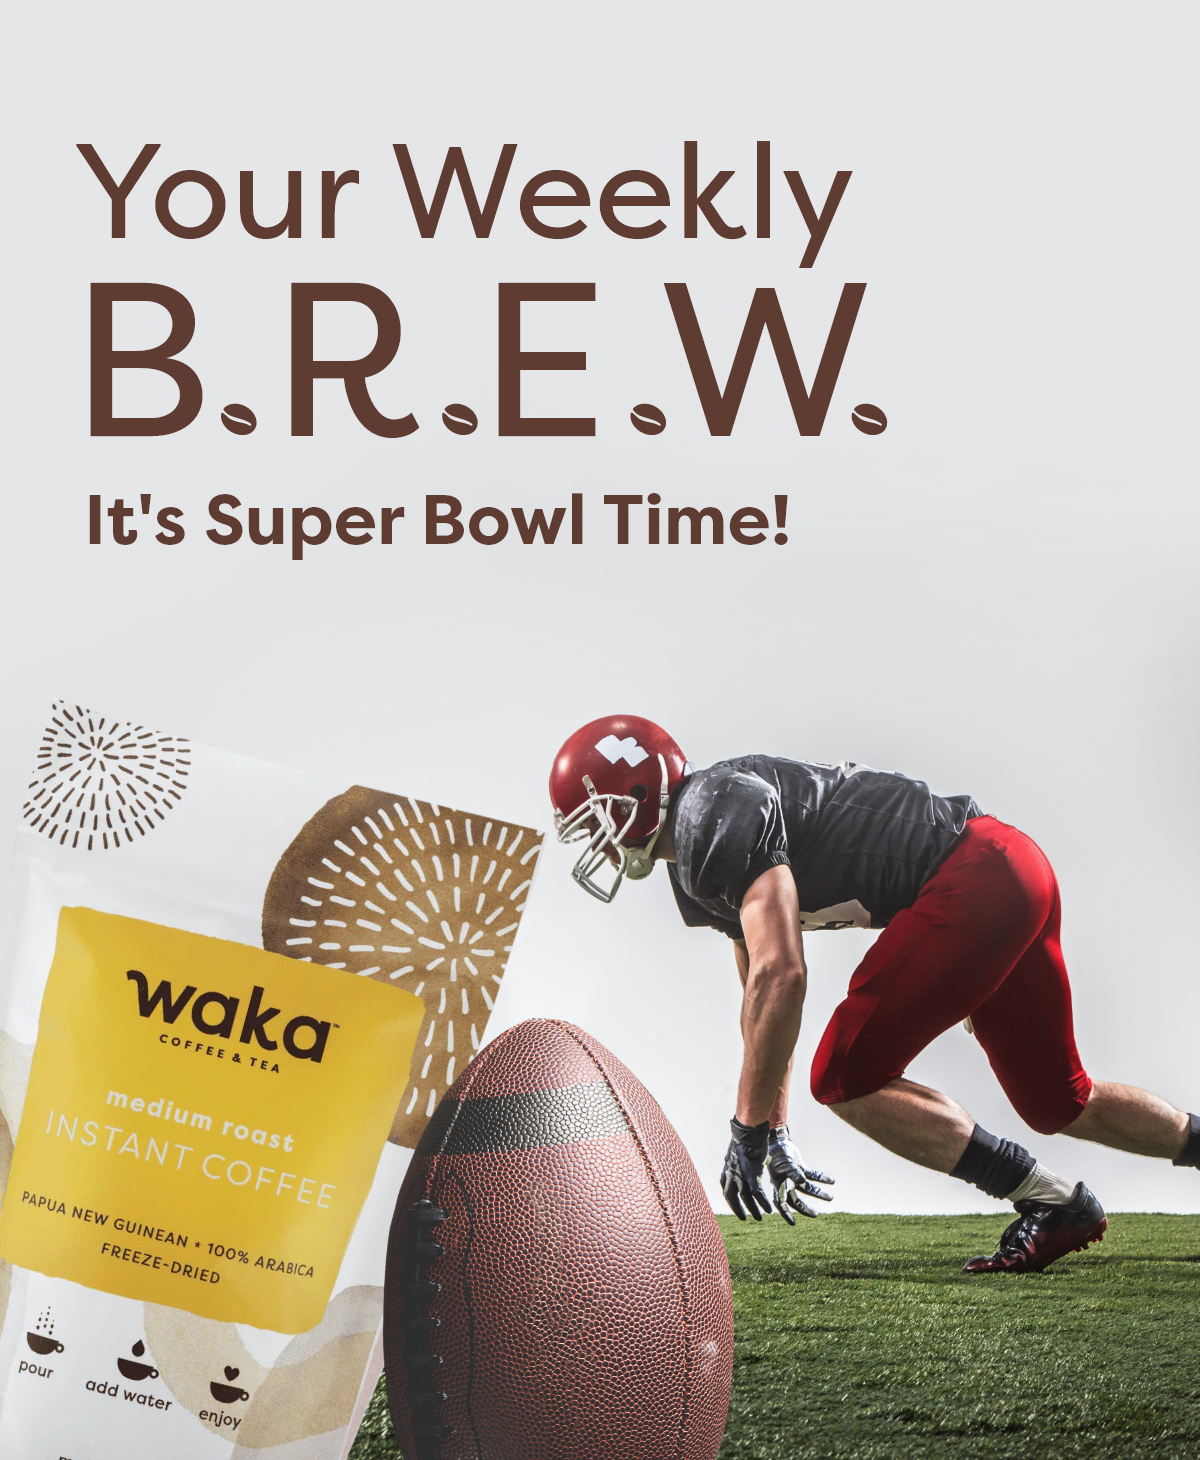 Your Weekly B.R.E.W. It's Super Bowl Time!